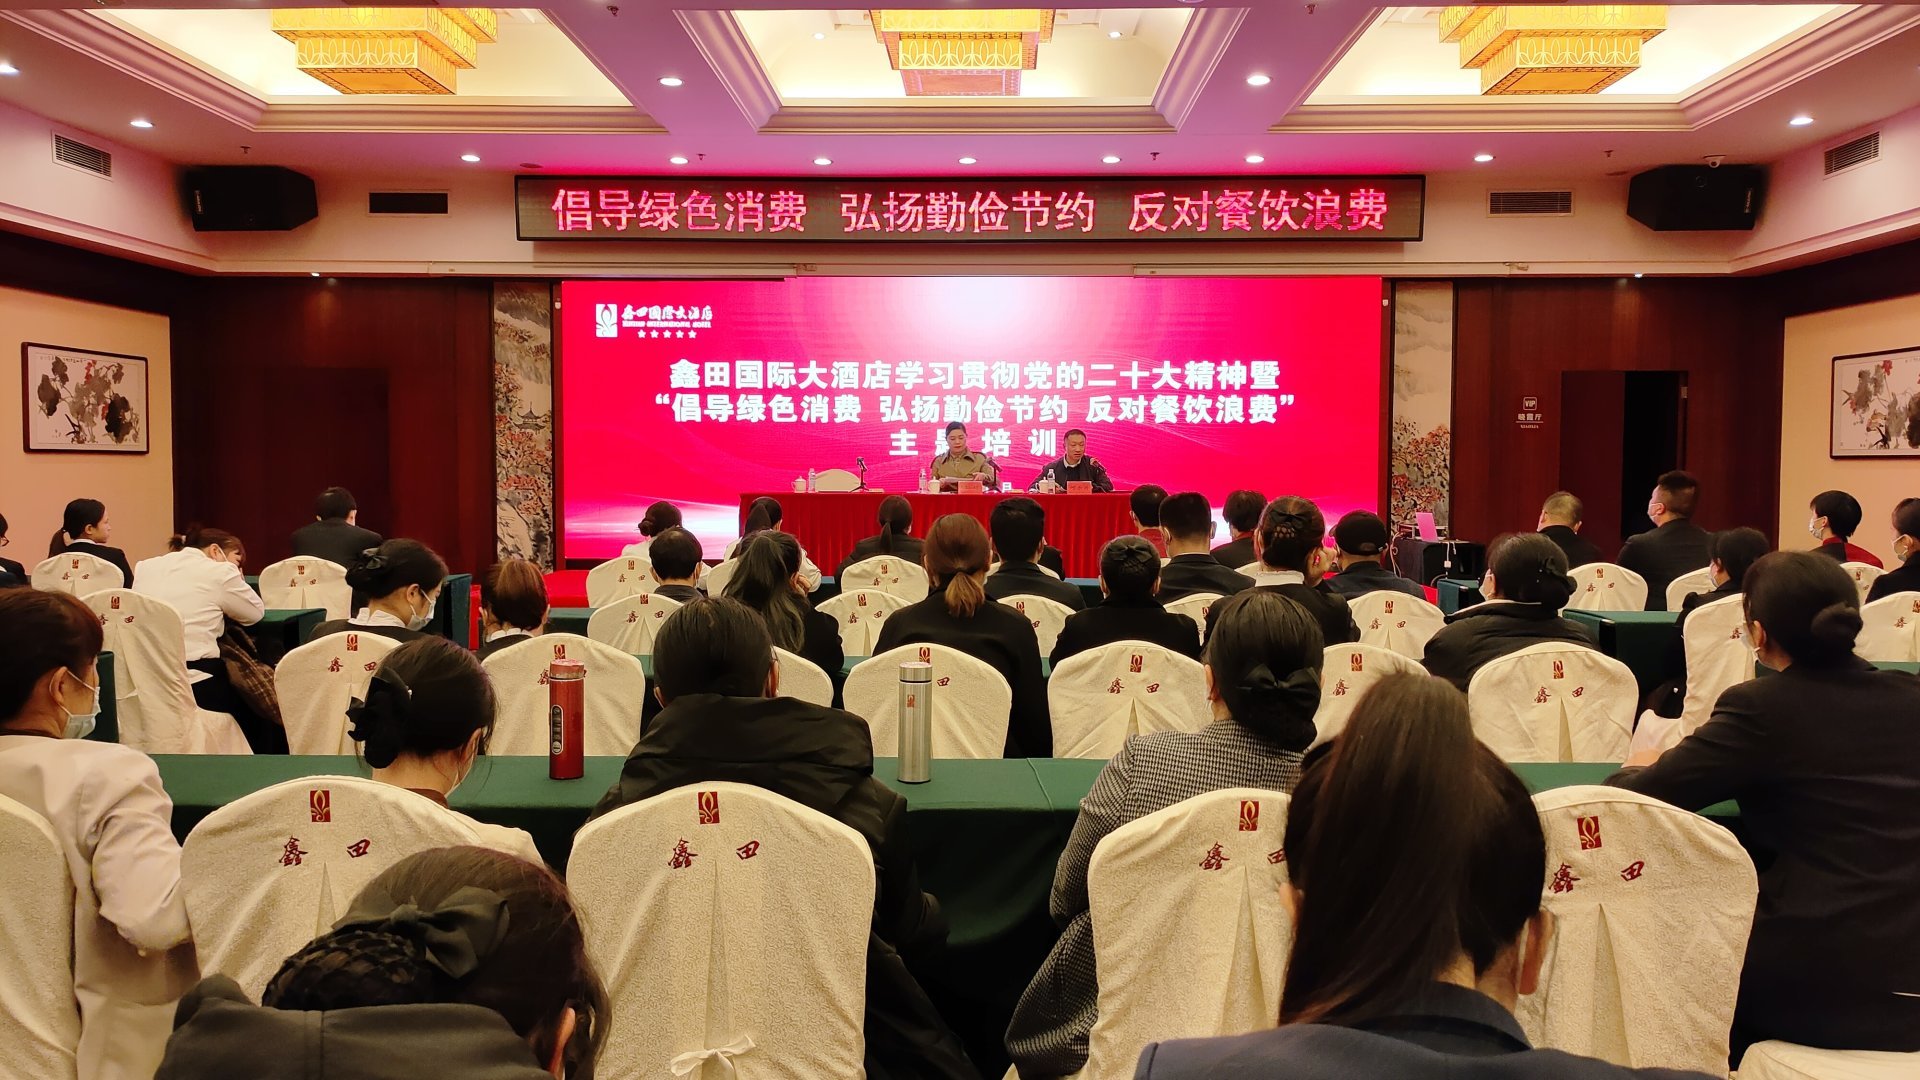 Learn the new journey of the 20th CPC National Congress